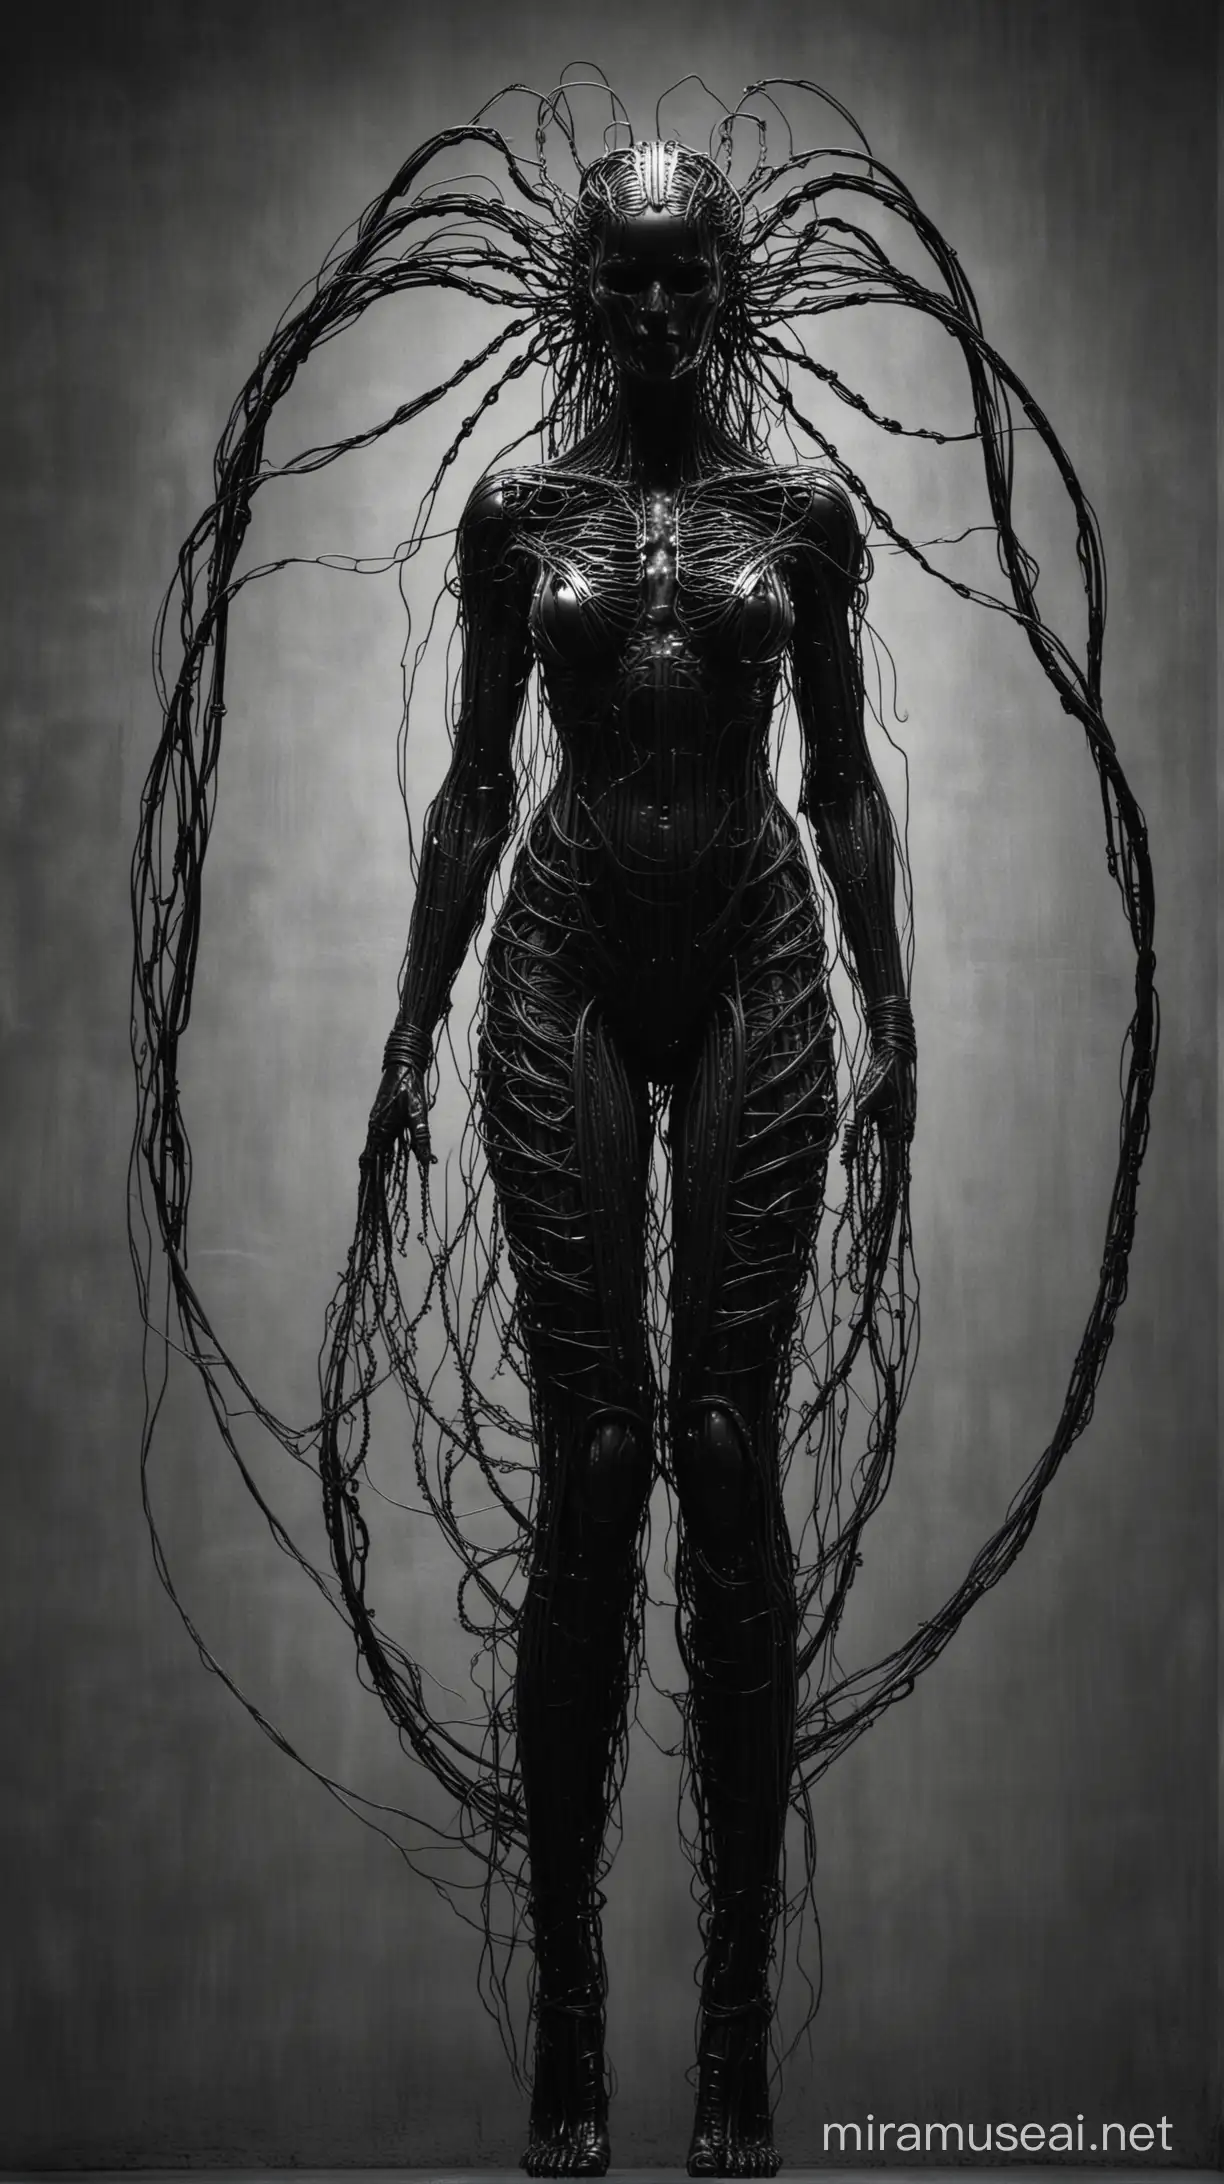 silhouette of woman created from intertwined wires horror giger